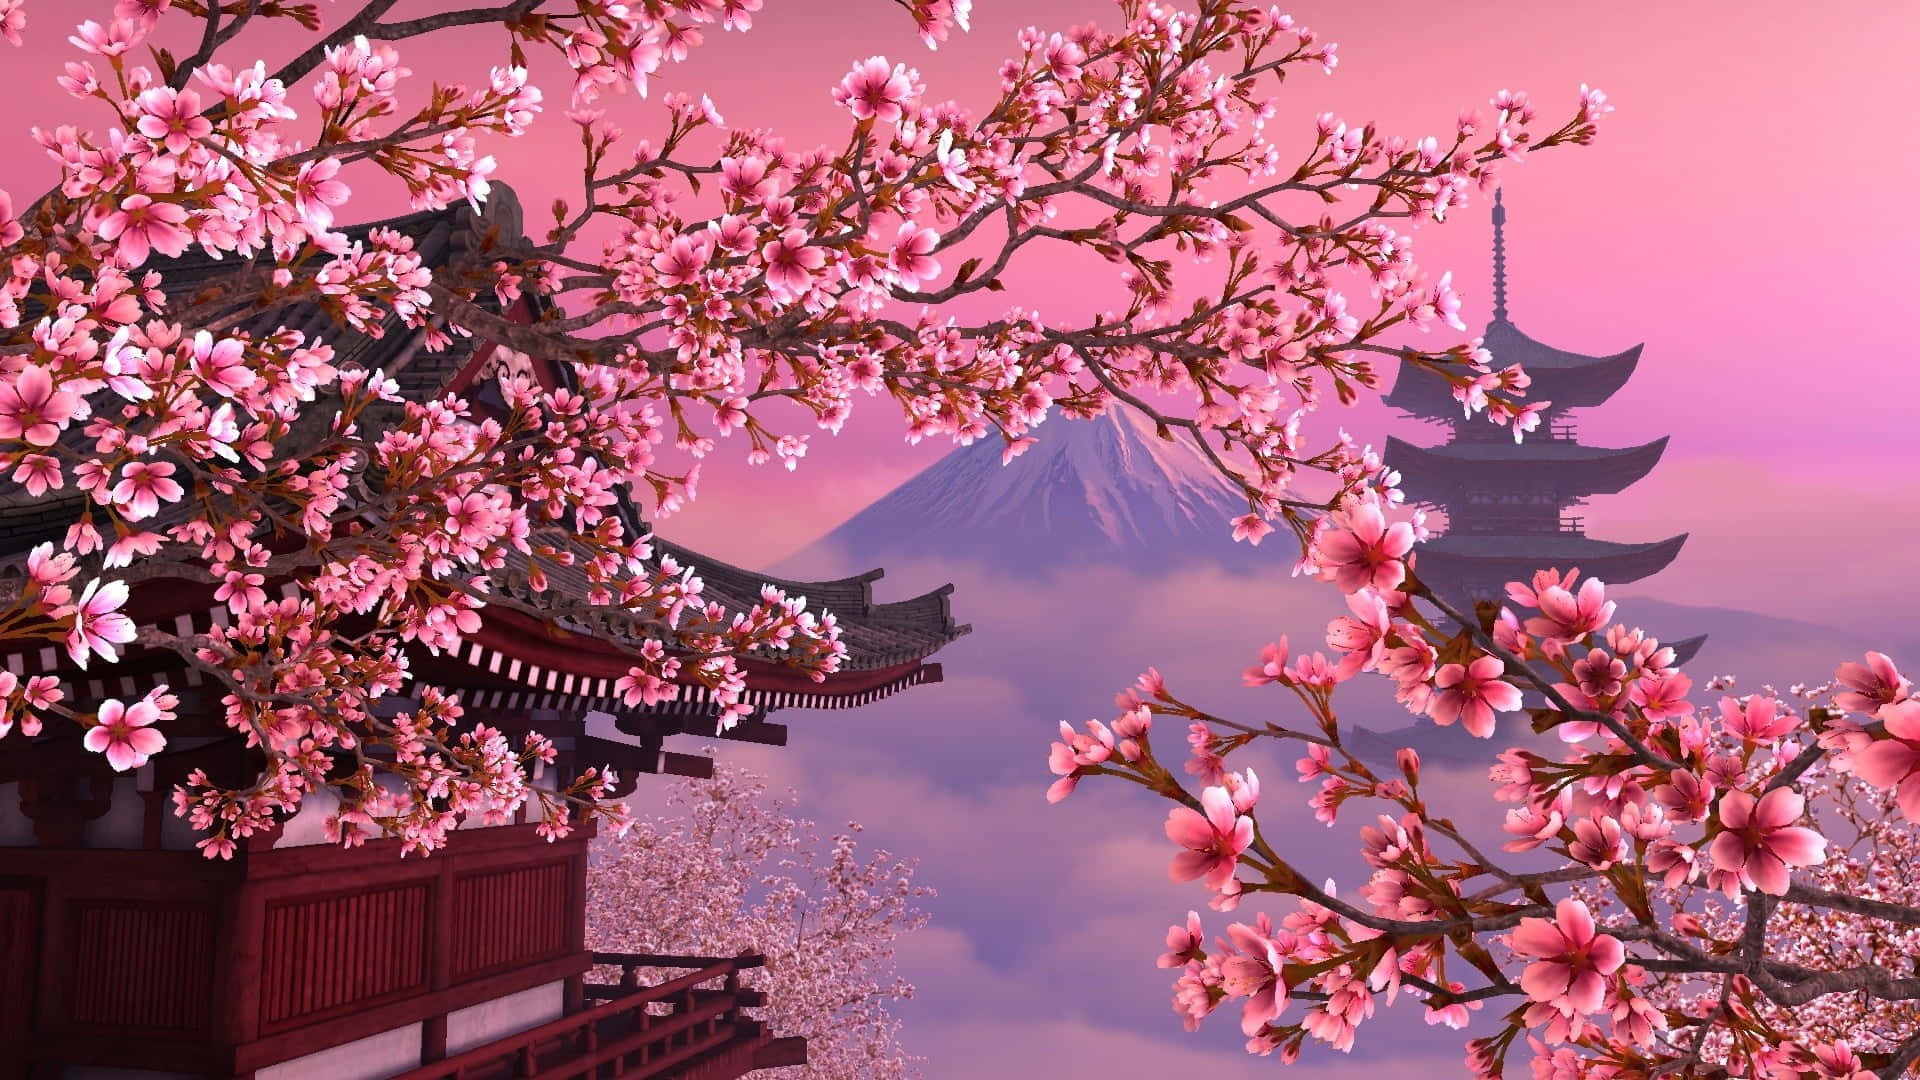 Aurora of Beauty Shines Brightly from Japan's Cultural Wealth Wallpaper